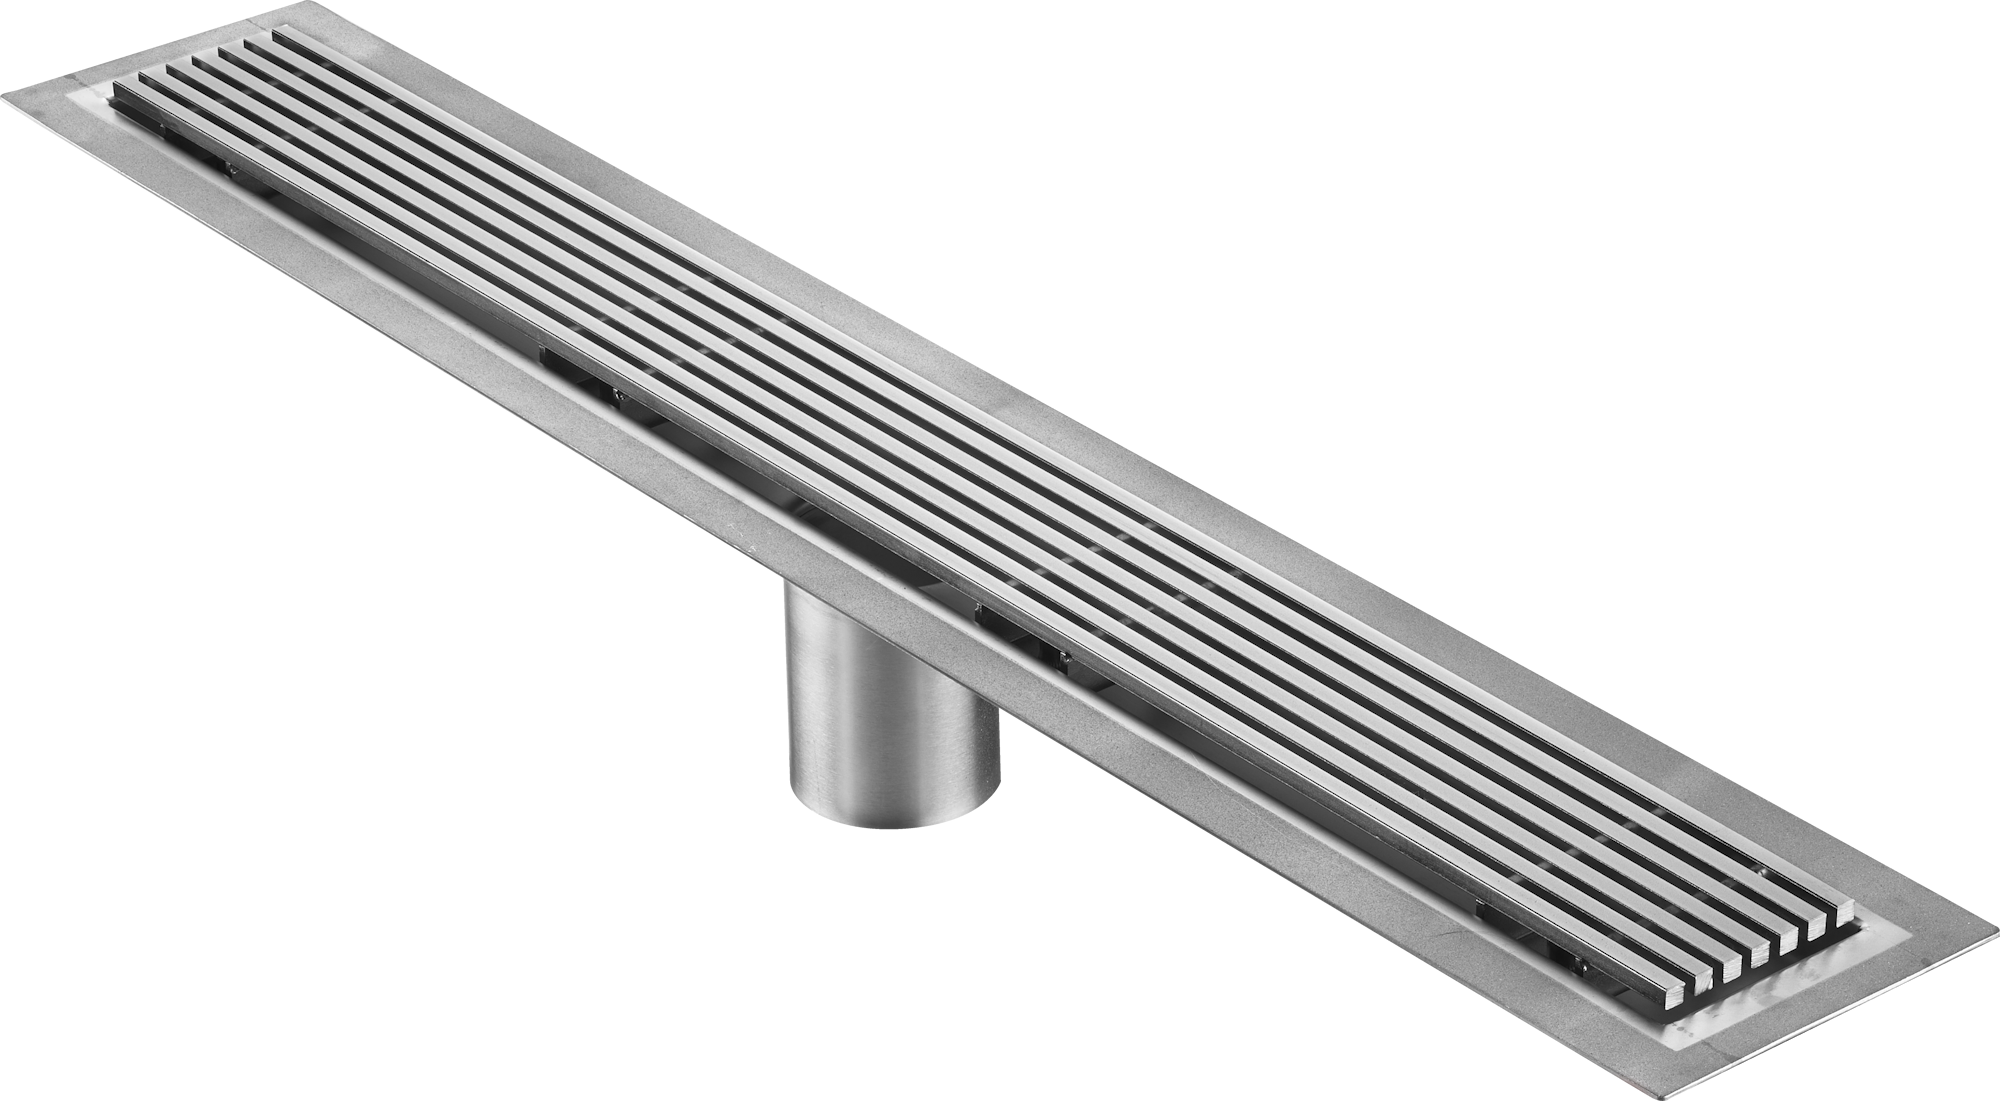 35 Inch Wedge Wire Grate Linear Drain Brushed Stainless Steel, Drains Unlimited